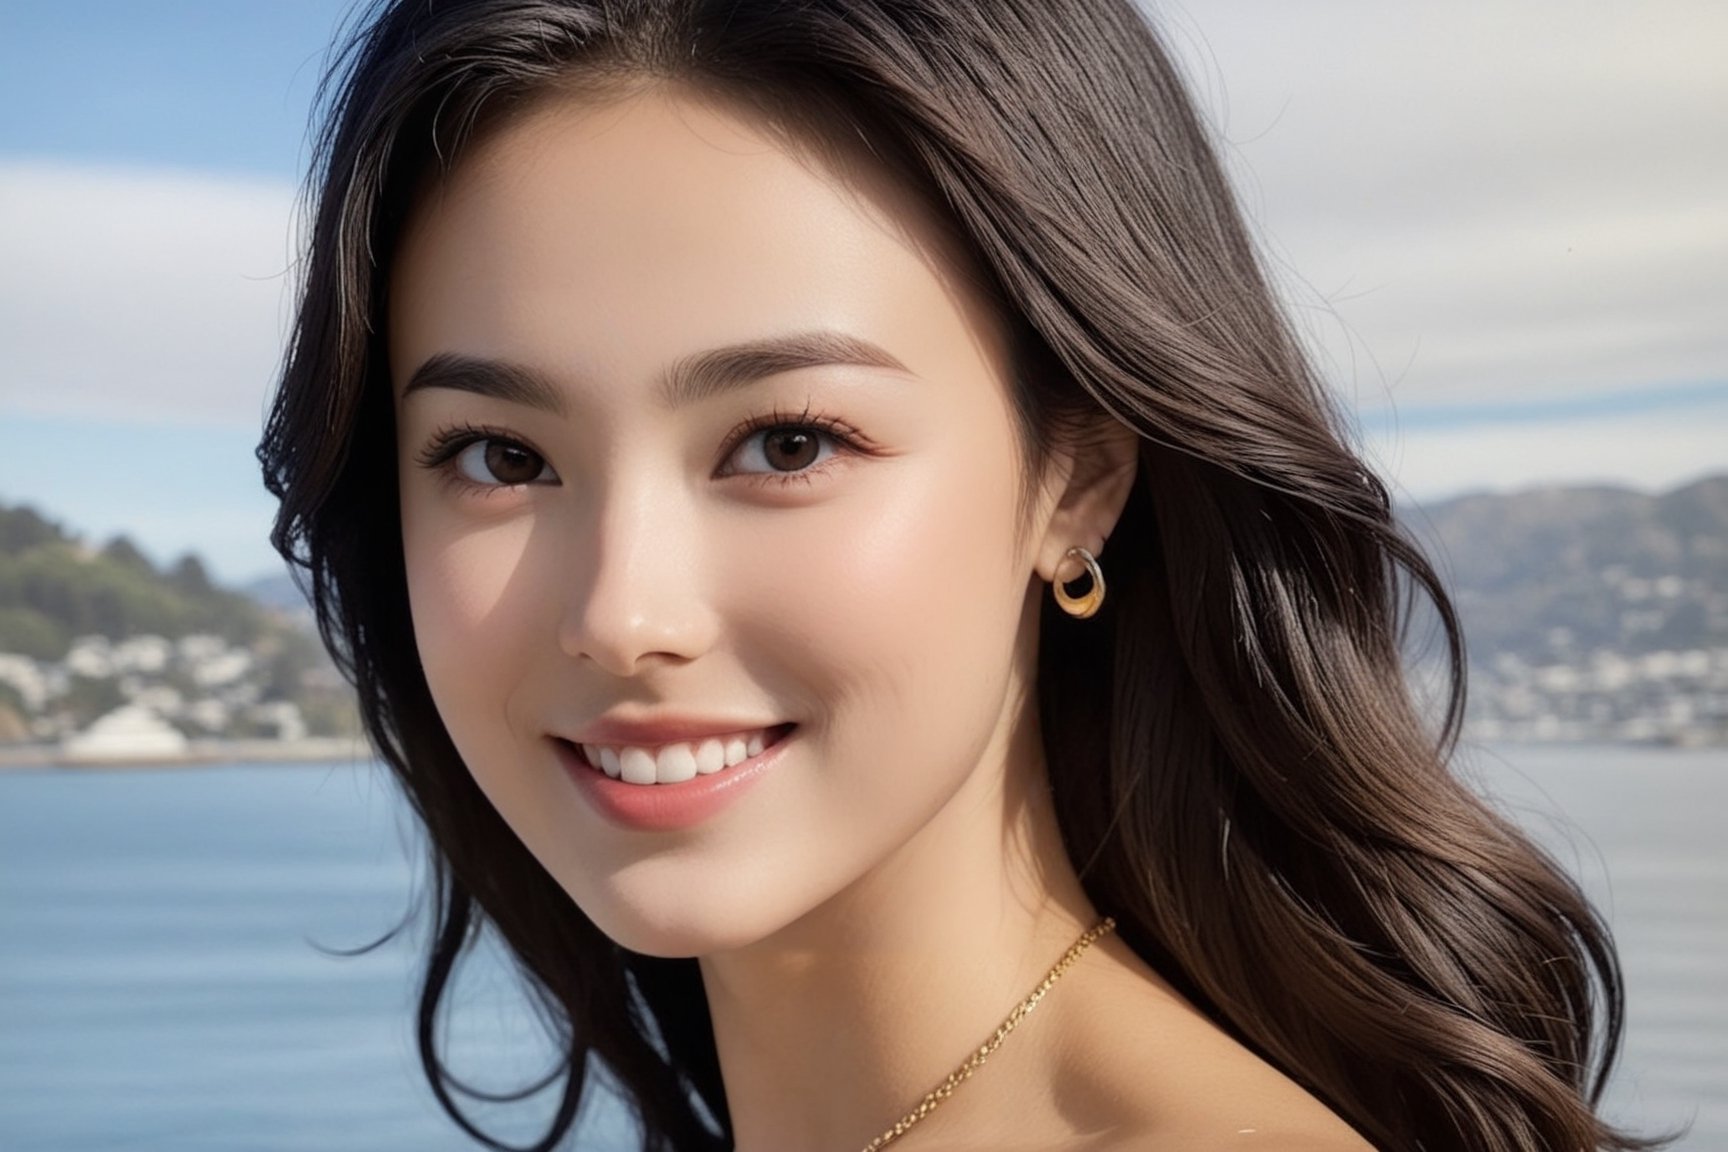 Hyper-Realistic photo of a girl,20yo,1girl,perfect female form,perfect body proportion,perfect anatomy,detailed exquisite face,soft shiny skin,smile,mesmerizing,short hair,small earrings,necklaces
BREAK
backdrop of a beautiful Sausalito in California,harbor,boat,ocean,bridge,(fullbody:1.2),(distant view:1.2),(heels:1.2),(model pose)
BREAK
(rule of thirds:1.3),perfect composition,studio photo,trending on artstation,(Masterpiece,Best quality,32k,UHD:1.5),(sharp focus,high contrast,HDR,hyper-detailed,intricate details,ultra-realistic,award-winning photo,ultra-clear,kodachrome 800:1.3),(chiaroscuro lighting,soft rim lighting:1.2),by Karol Bak,Antonio Lopez,Gustav Klimt and Hayao Miyazaki,photo_b00ster,real_booster,ani_booster,wonder-woman-xl,song-hyegyo-xl